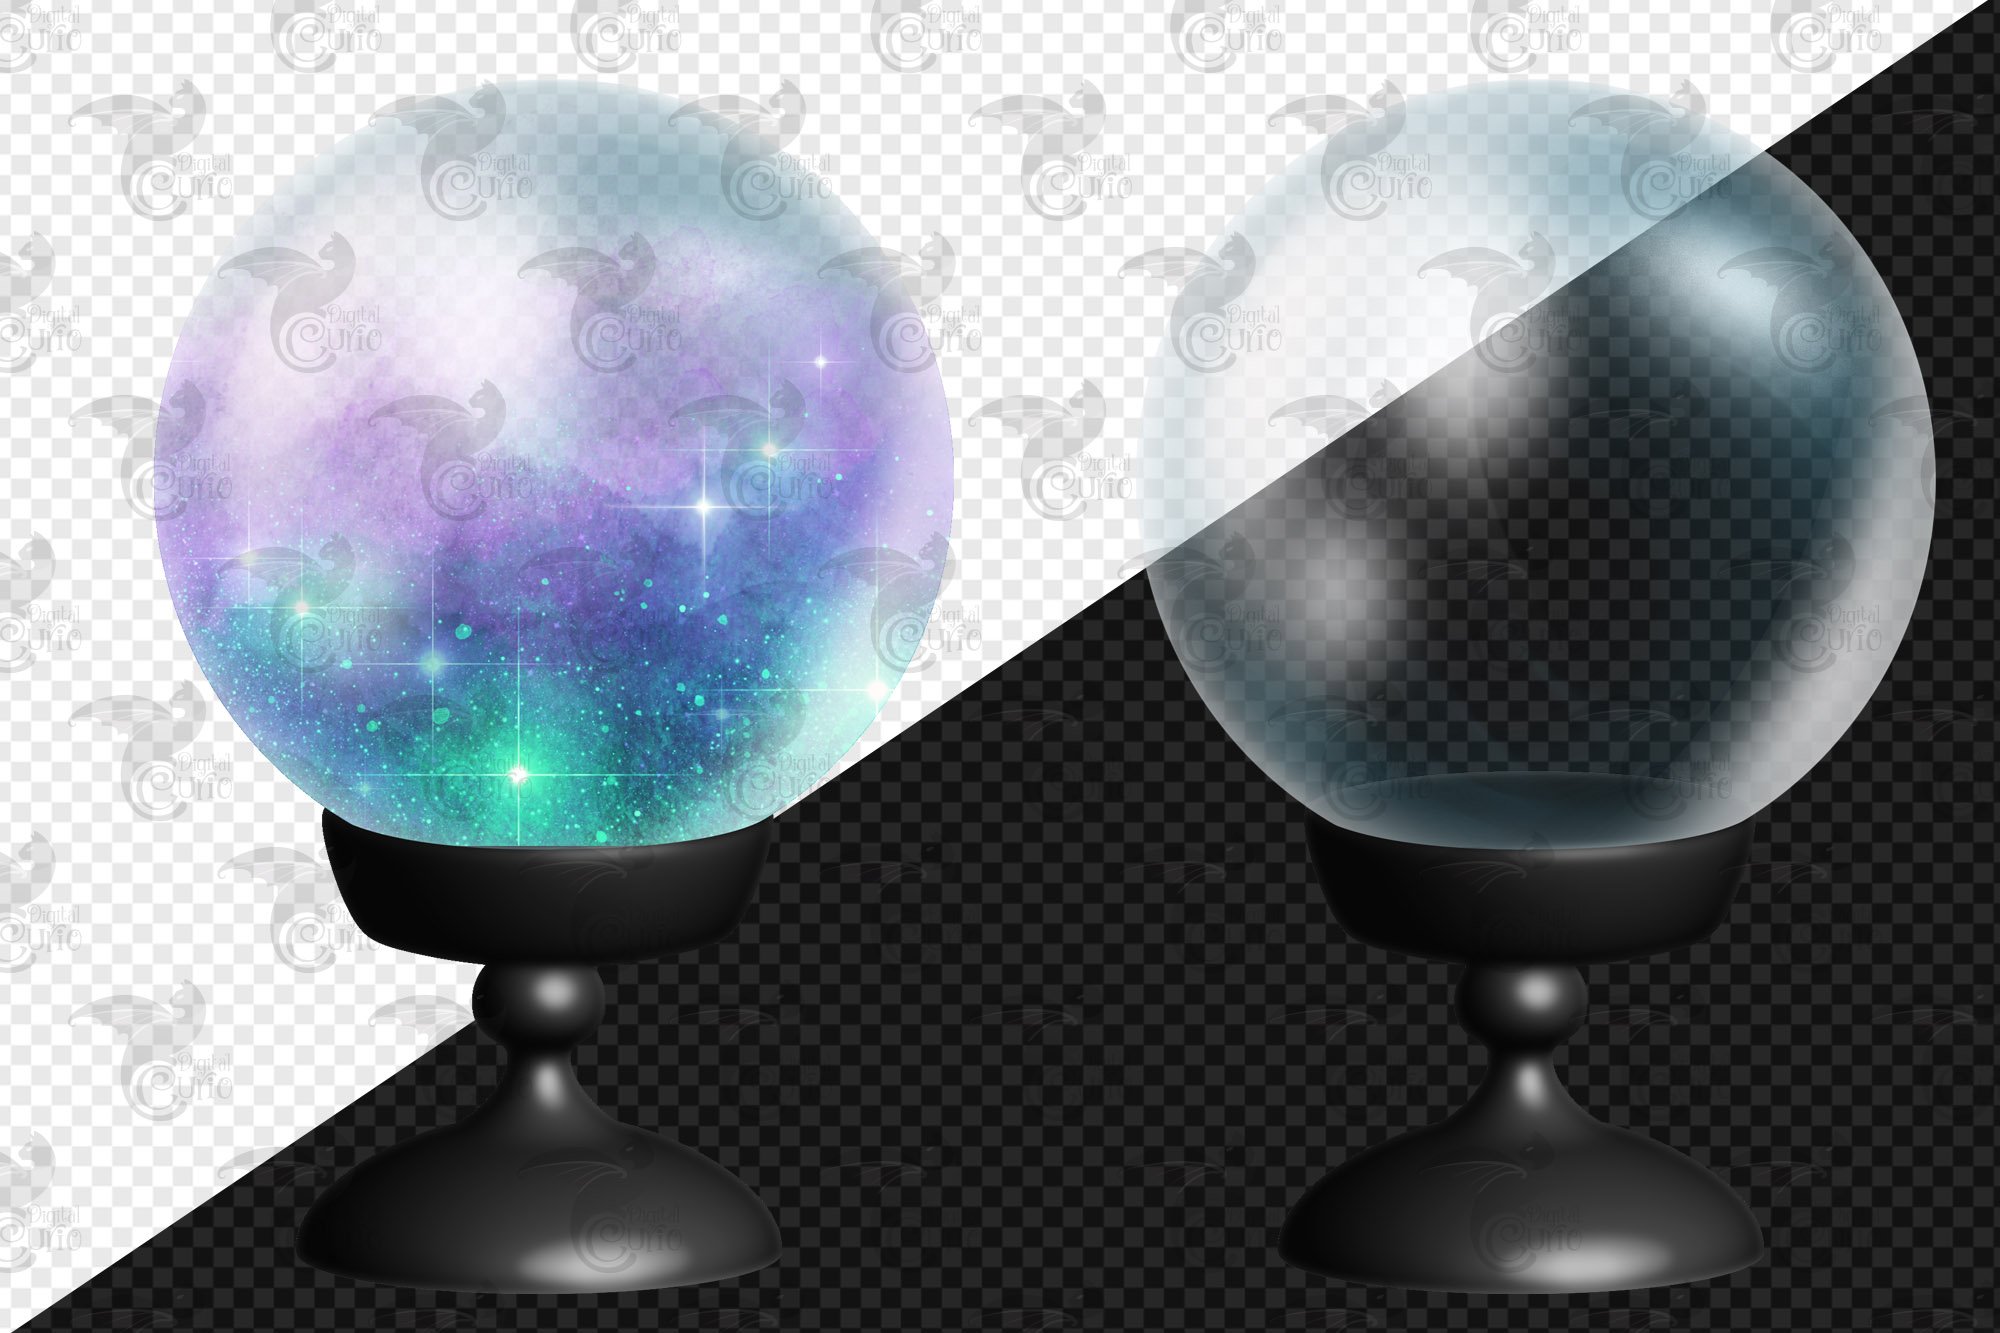 crystal ball clipart preview 5 635